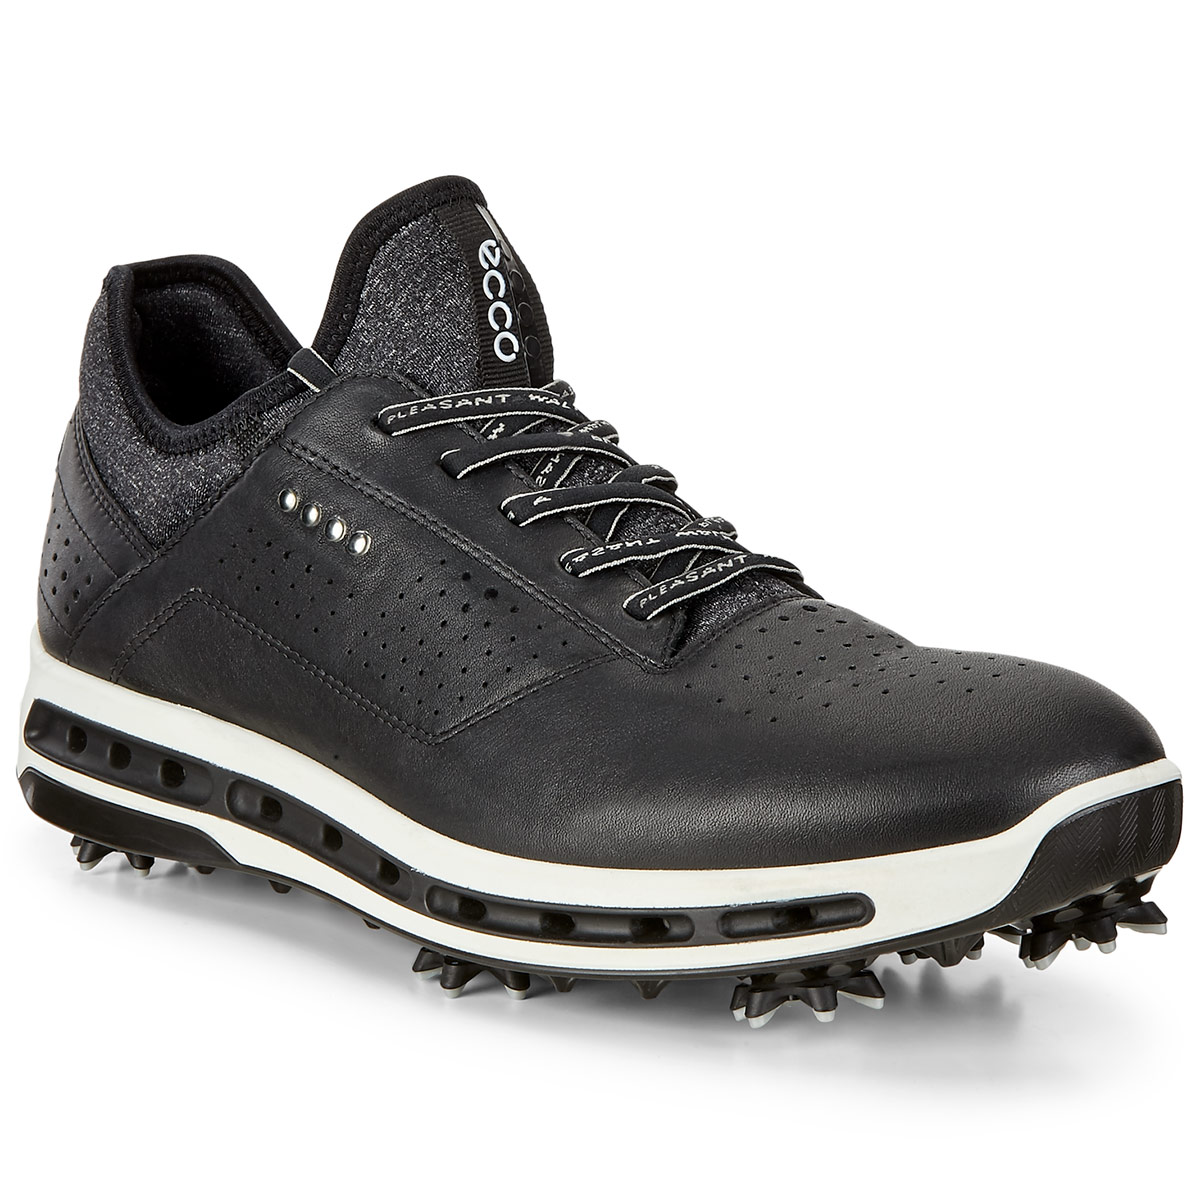 ECCO Cool Shoes from american golf